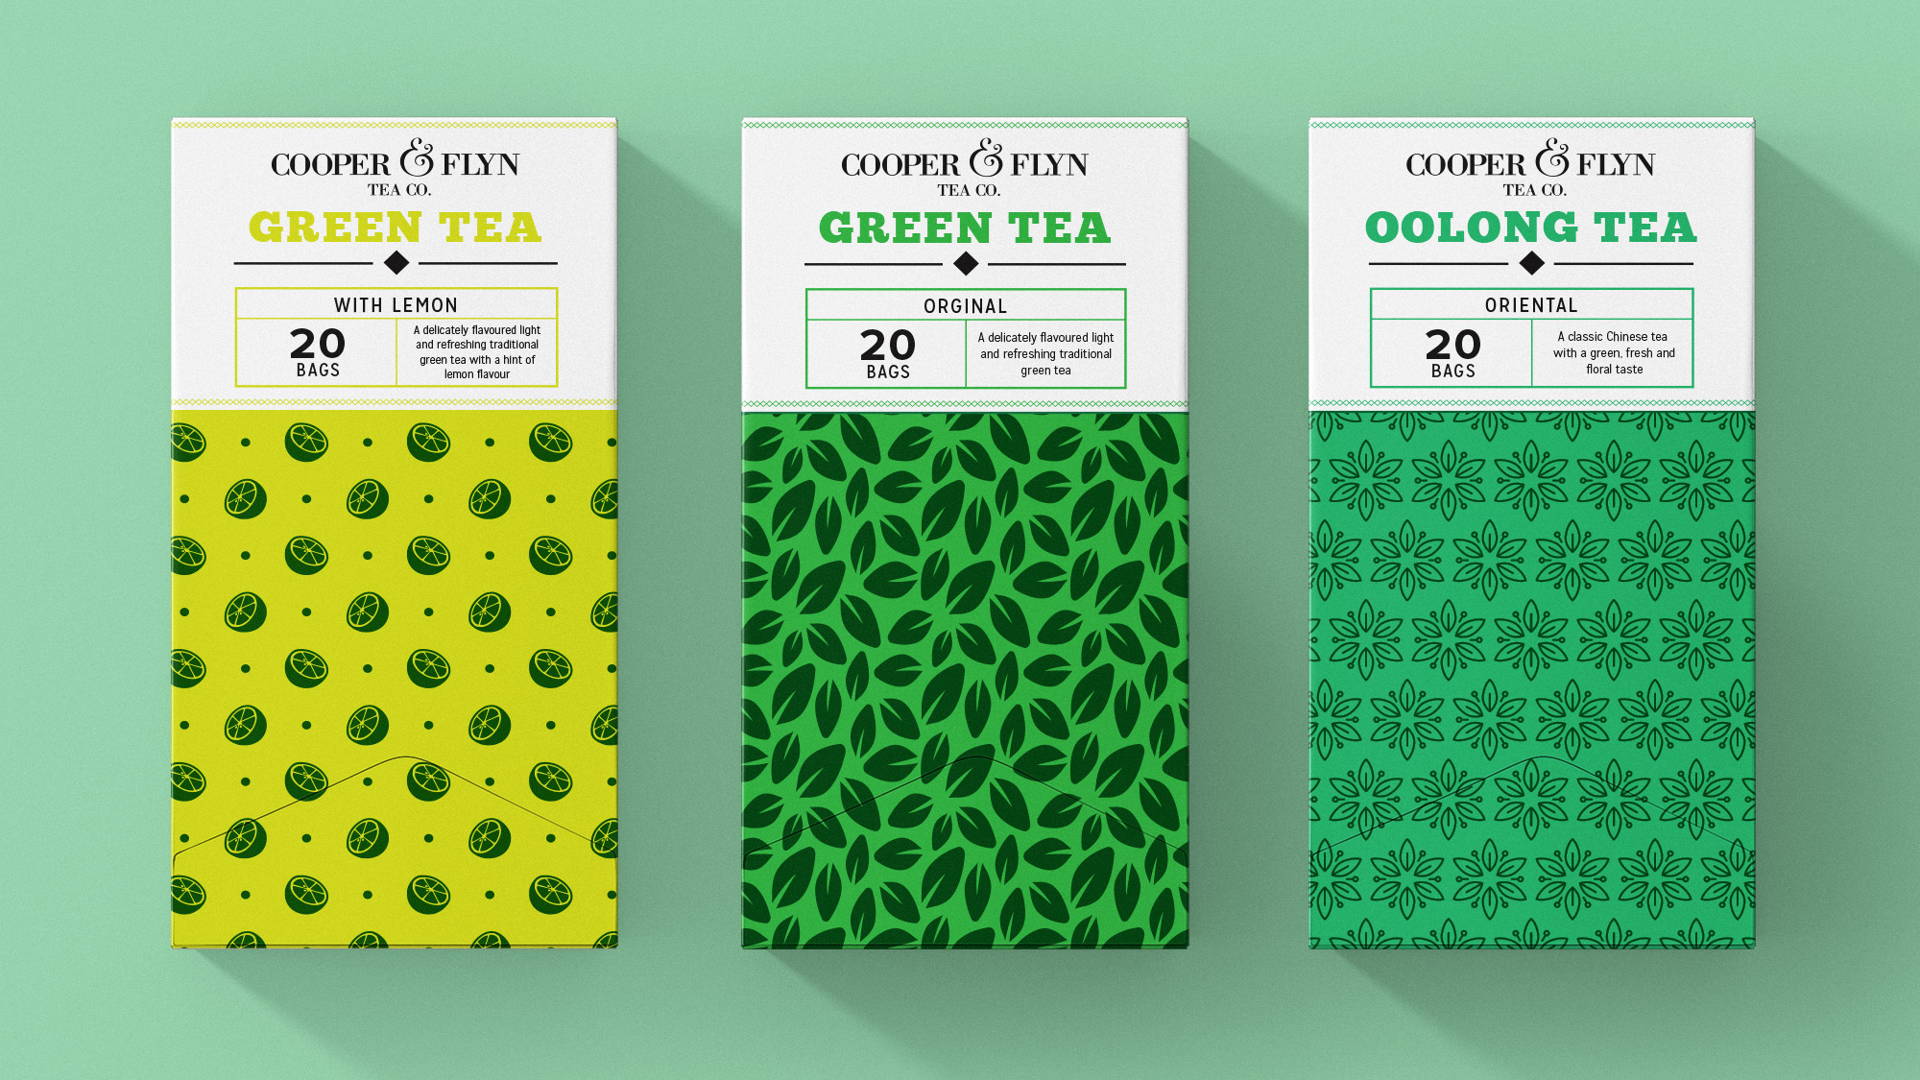 Featured image for This South African Tea Brand is Bringing On The Awesome Patterns